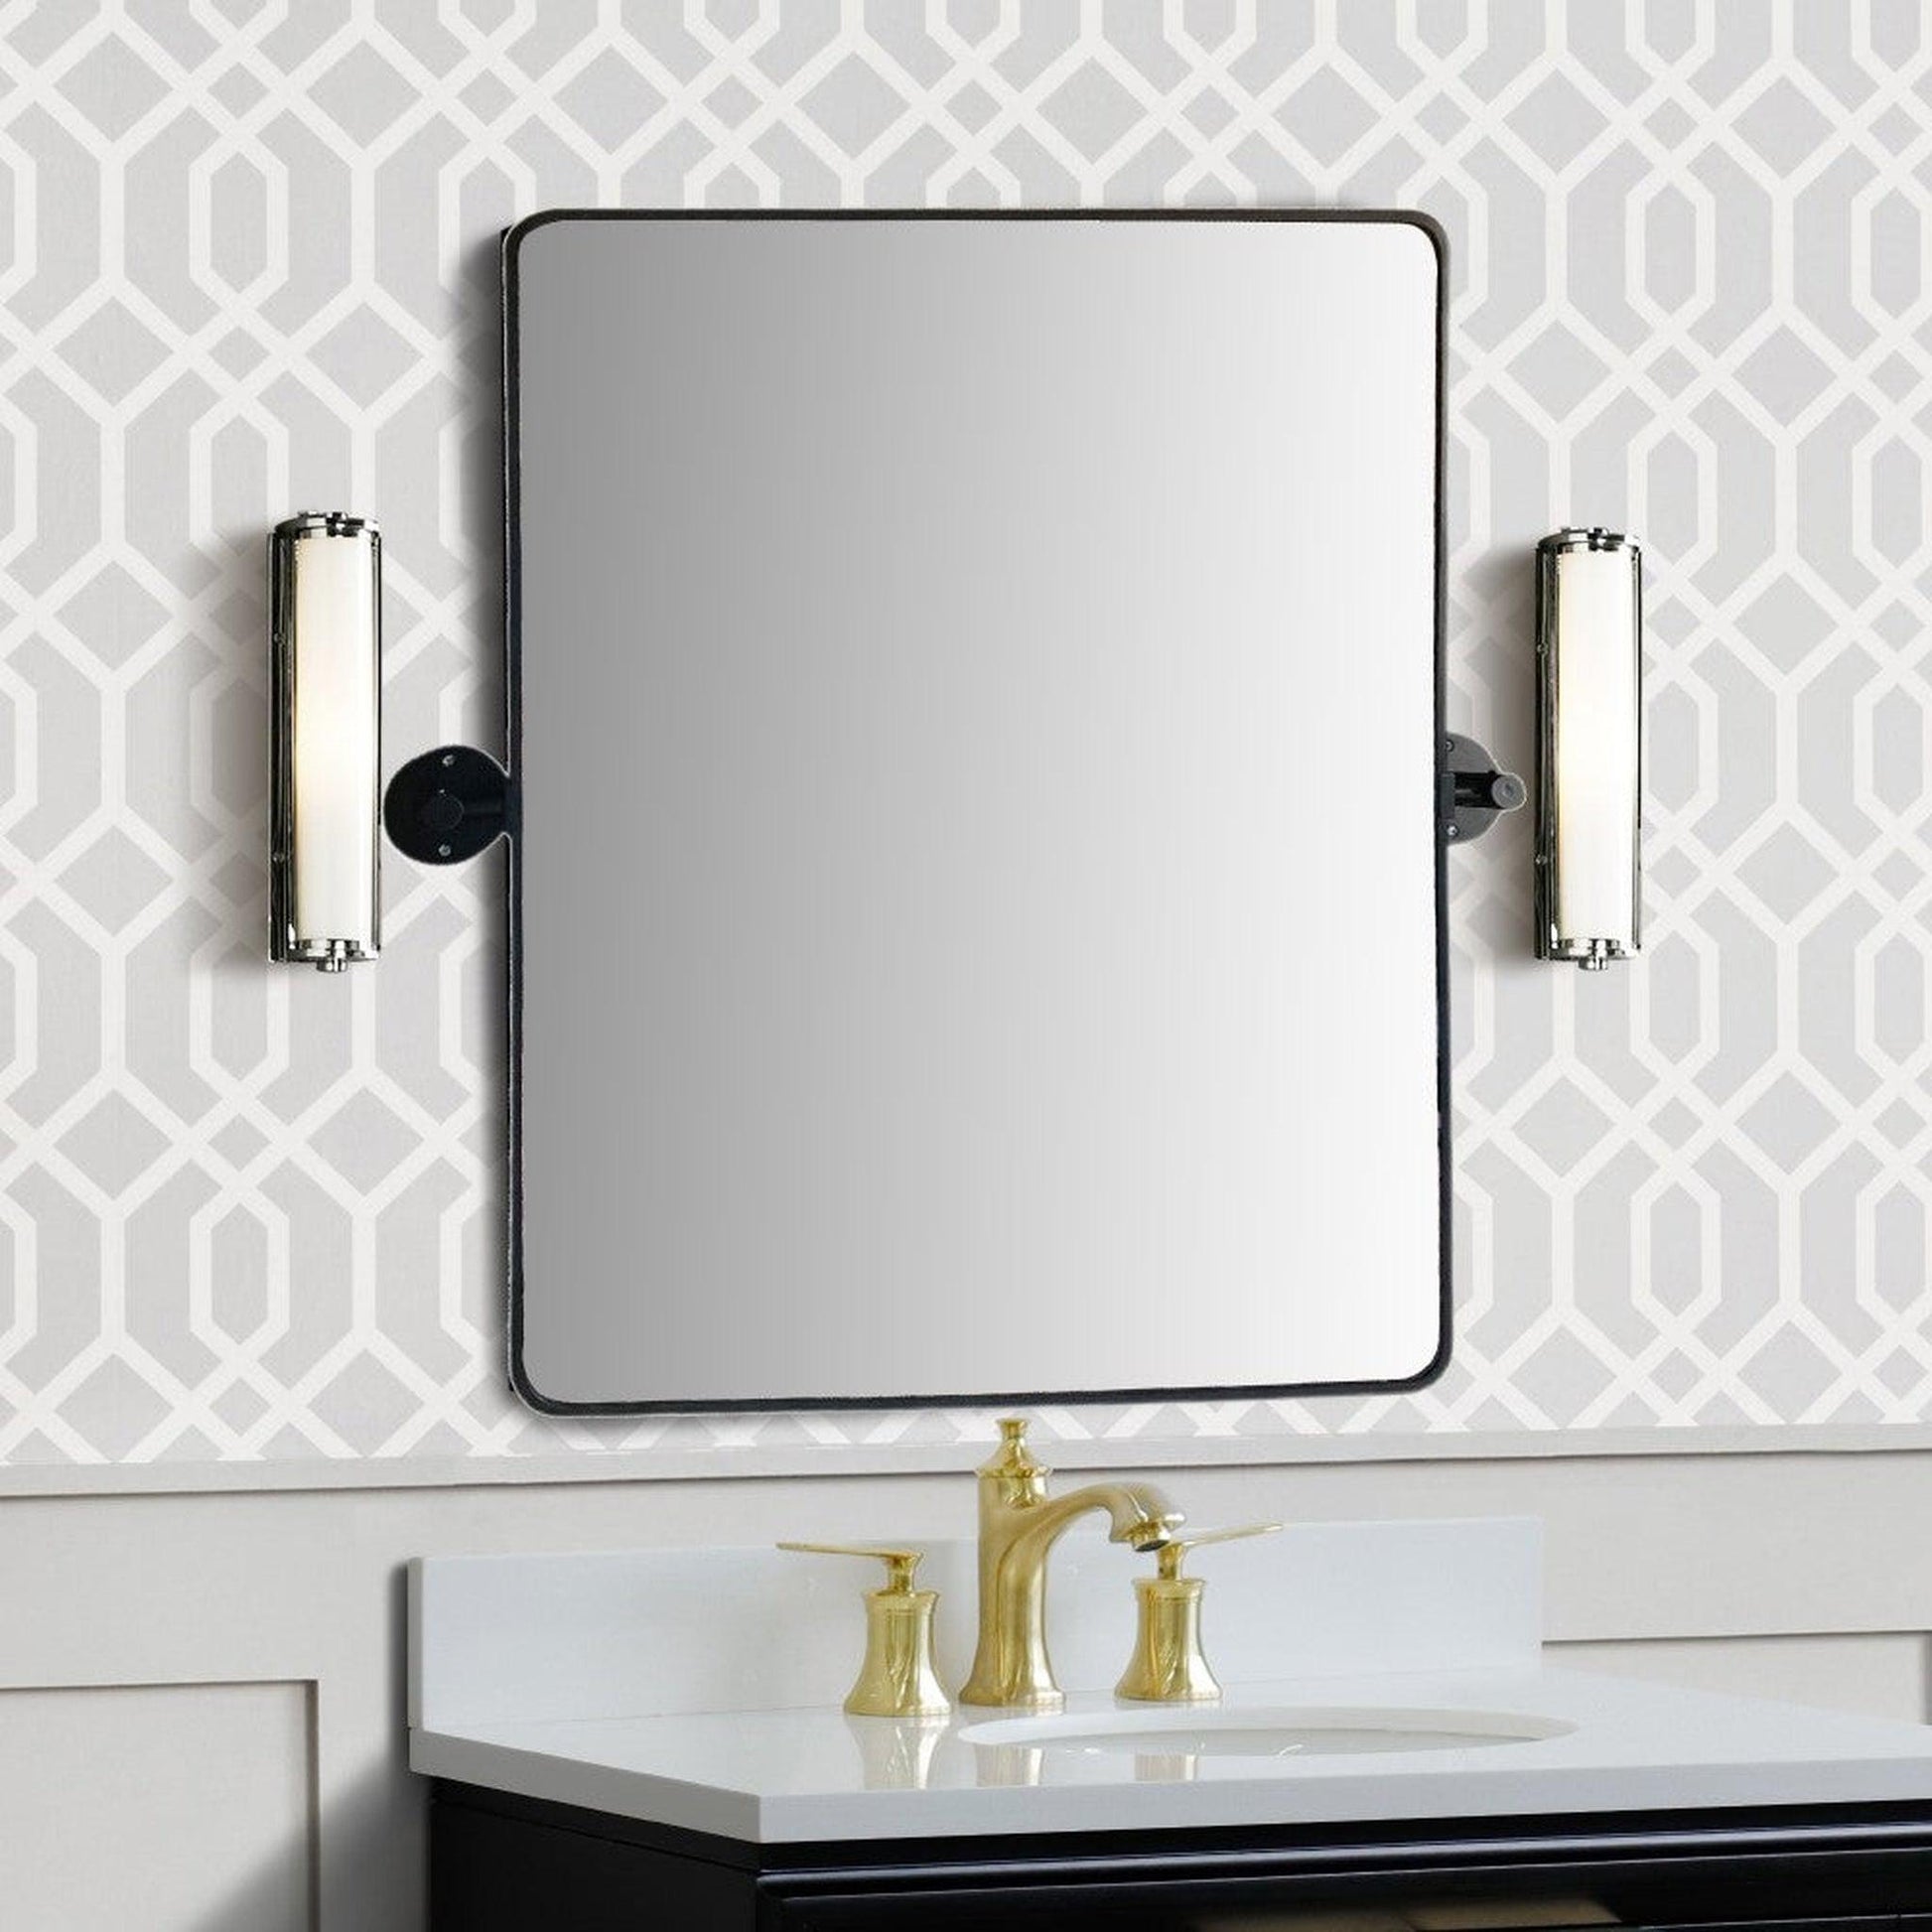 Bellaterra Home 28" x 30" Black Rectangle Wall-Mounted Steel Framed Mirror With Bracket Support